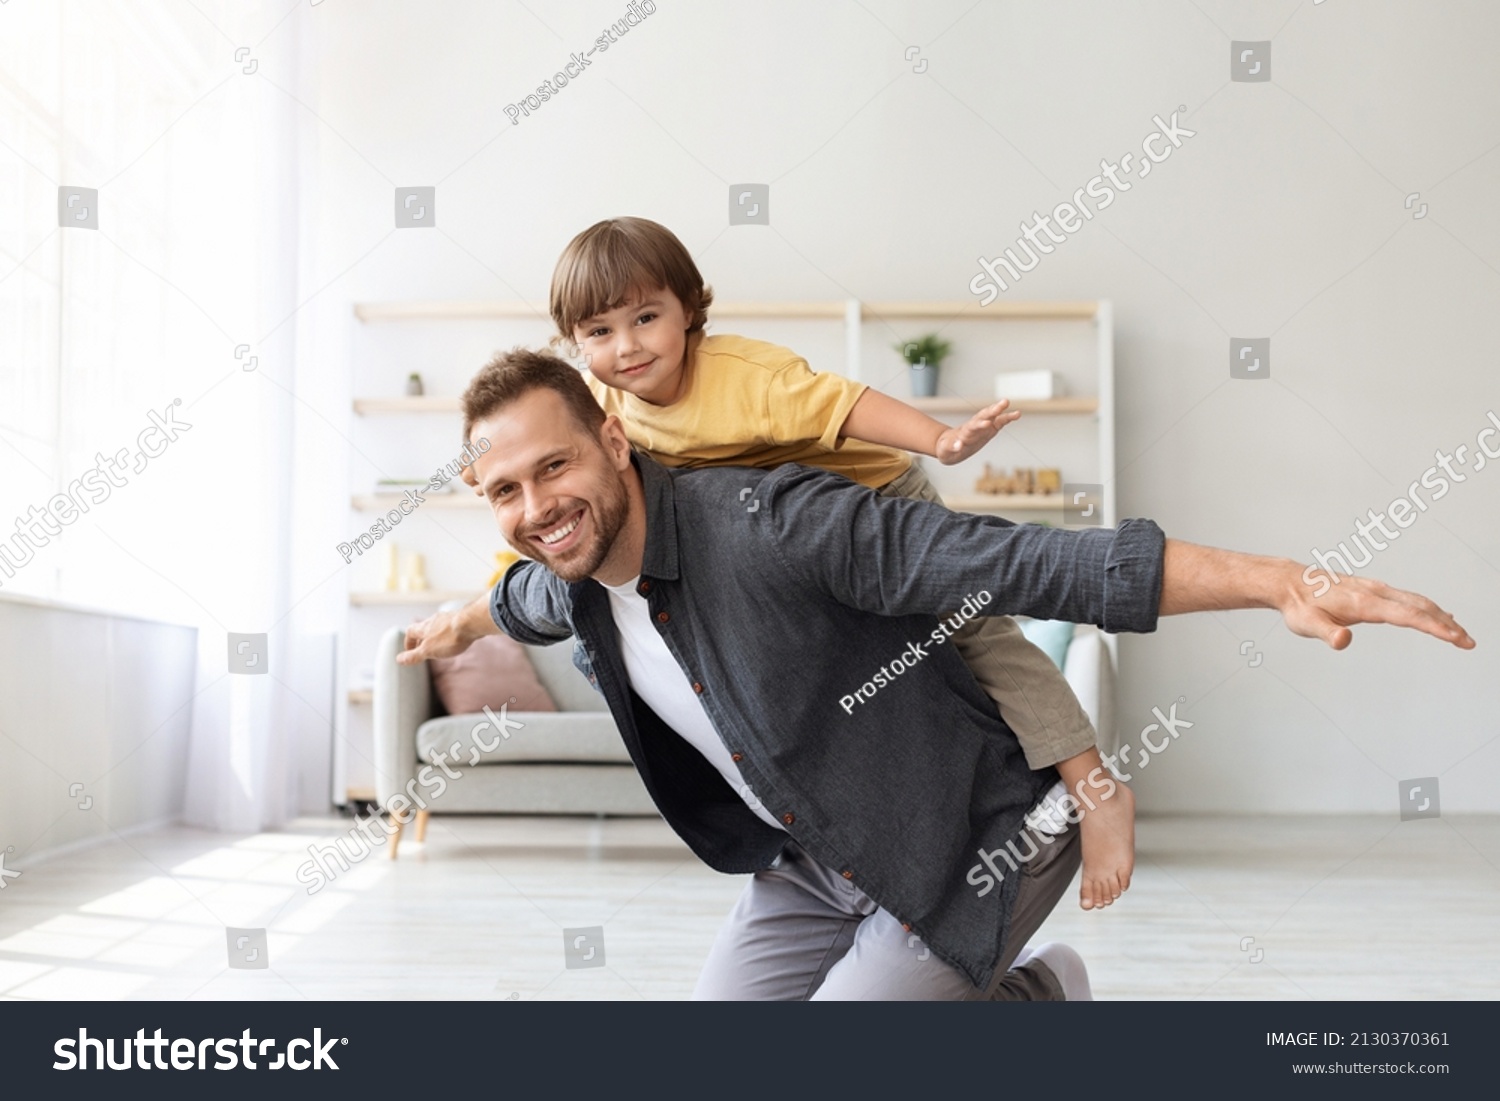 Games at home. Happy little boy riding daddy's back at home, kid playing plane together with father, smiling to camera at living room, free space #2130370361